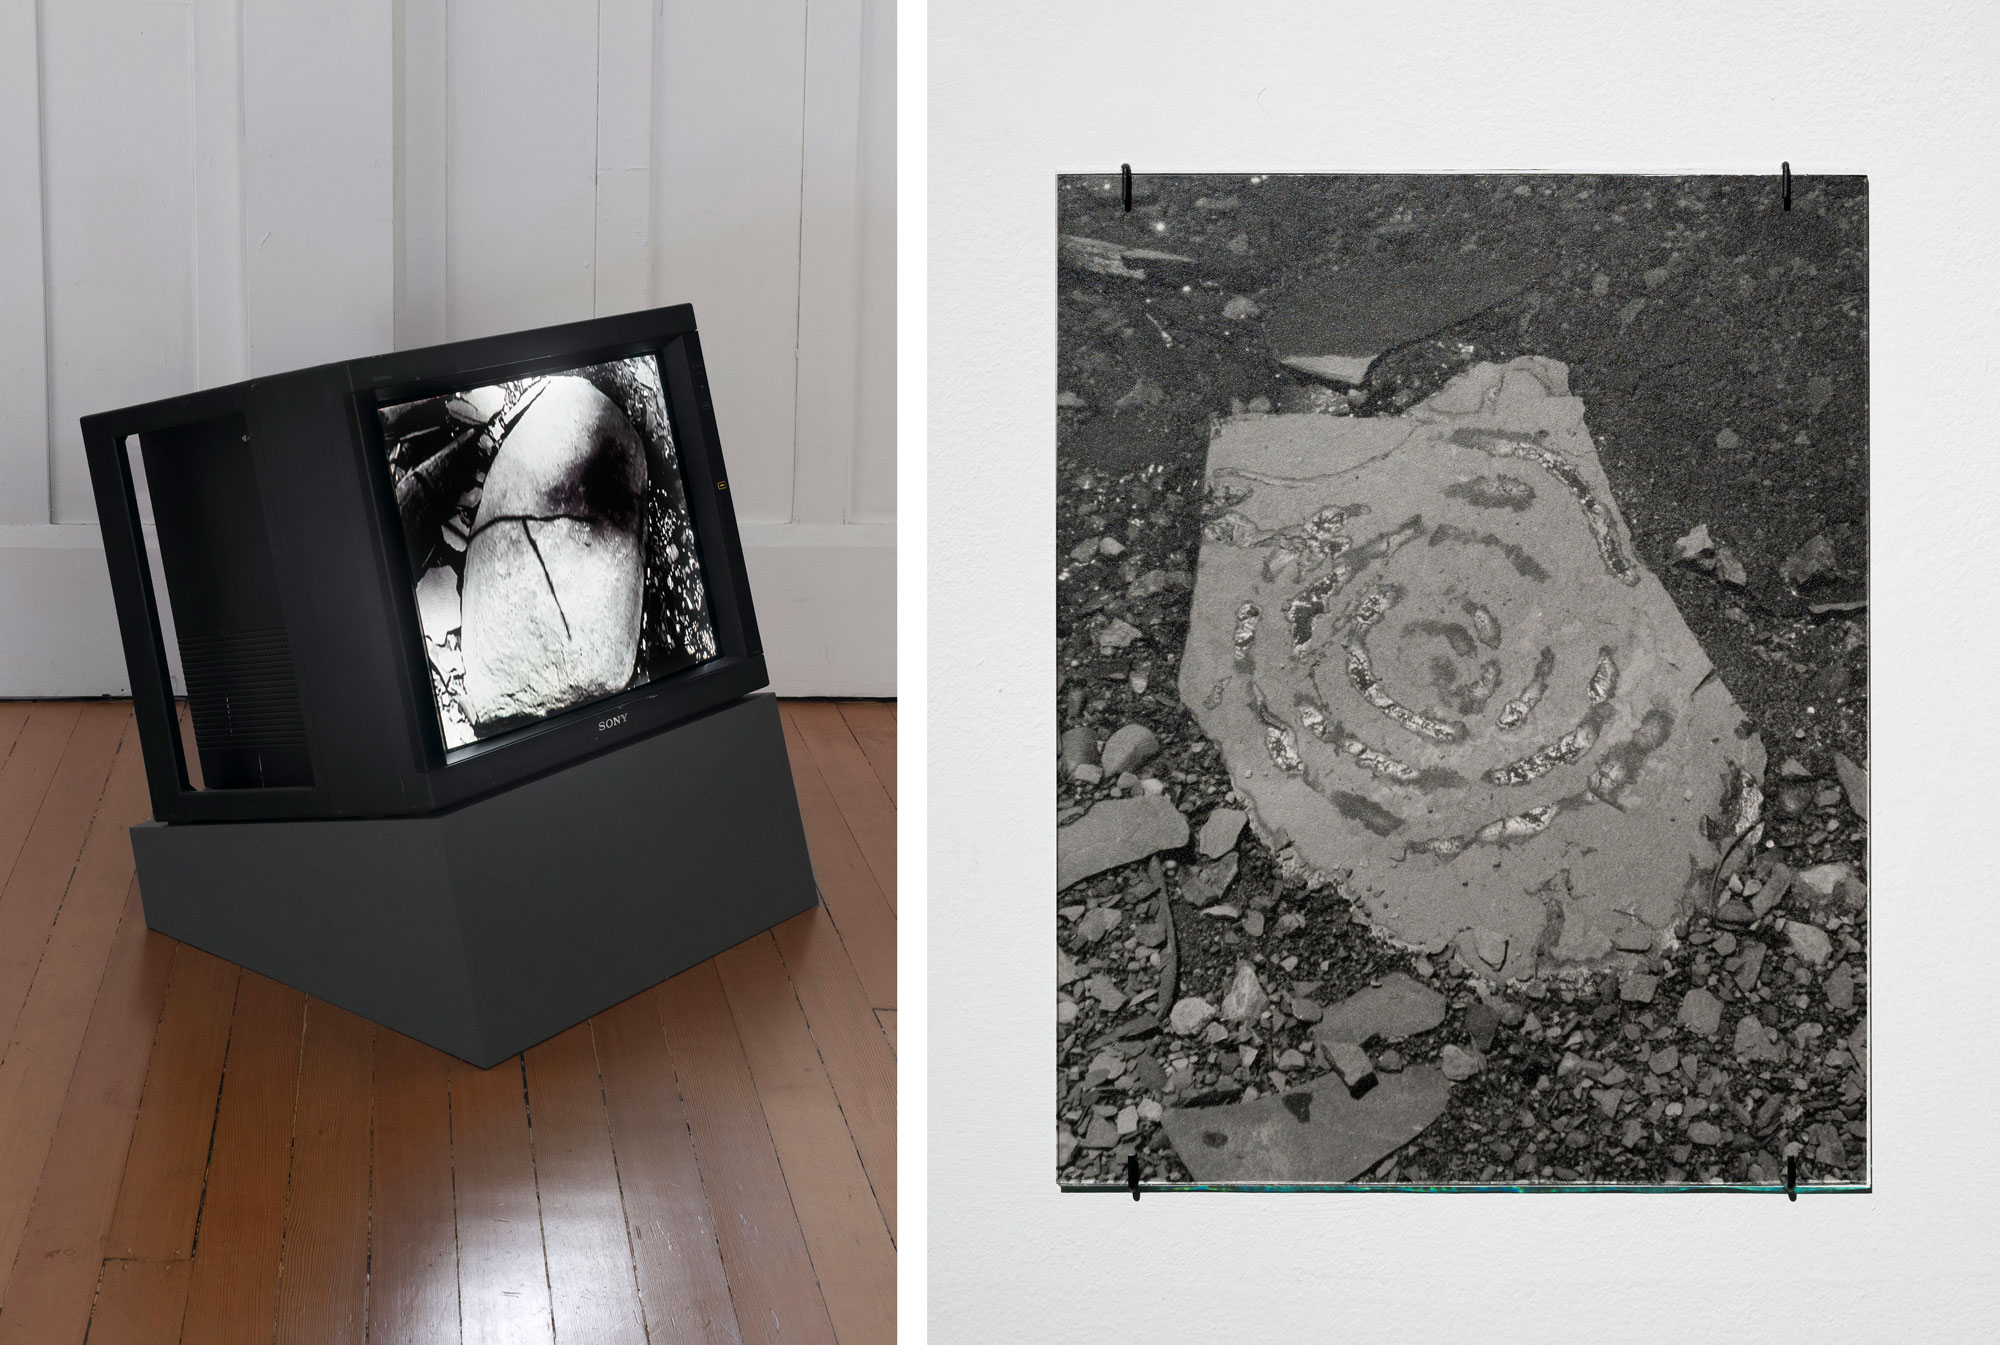 two images, one of monitor with black-and-white video playing, the other of a photo print of a spiral painted with water on a rock